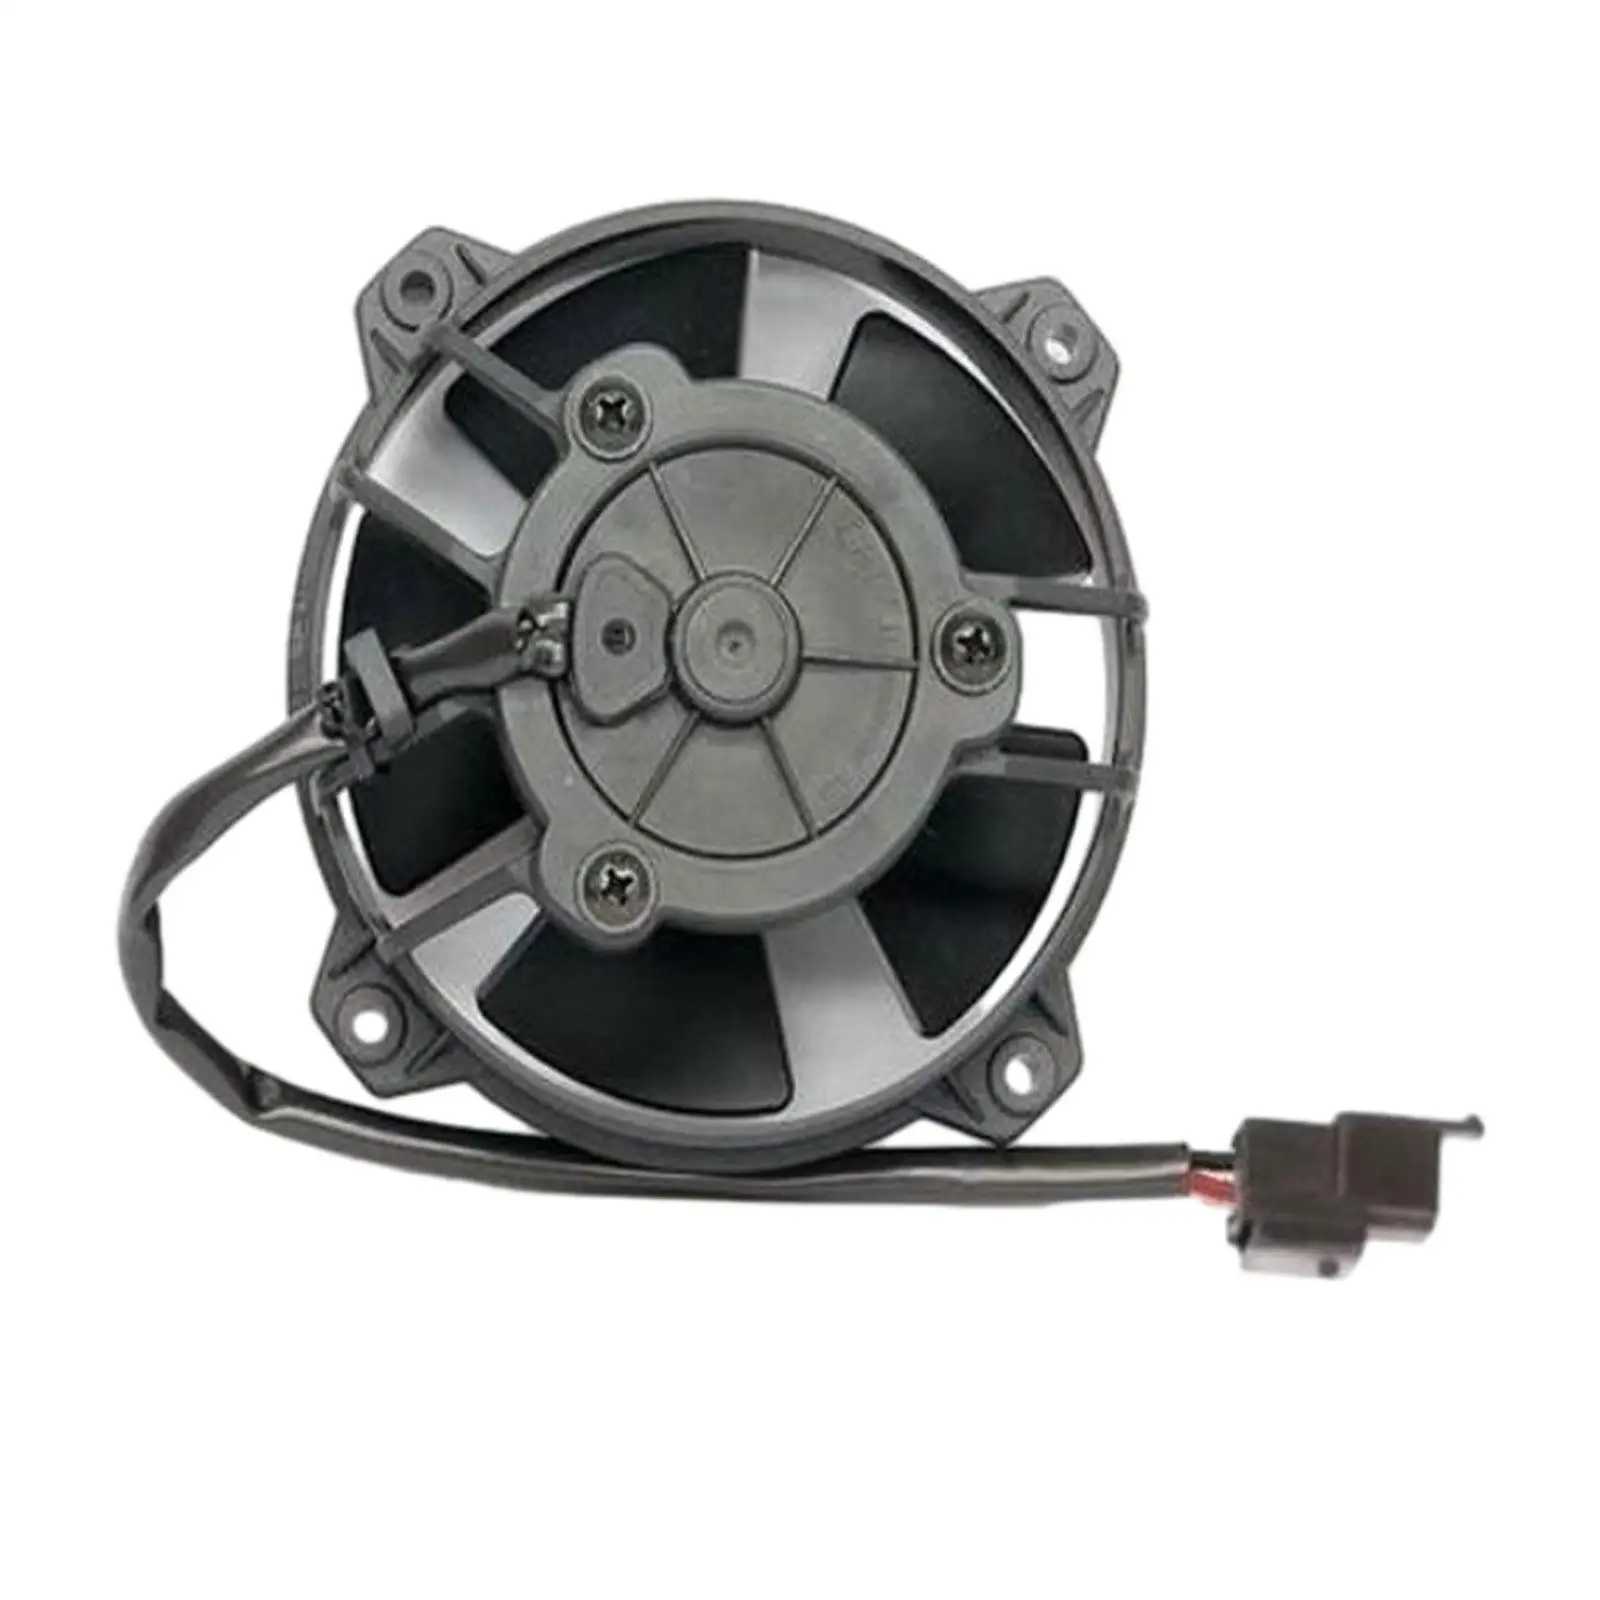 Puller Low Profile Fan 4 inch Handle Fan Blade Premium Repair Stable Performance Automotive Accessories Easily Install Premium